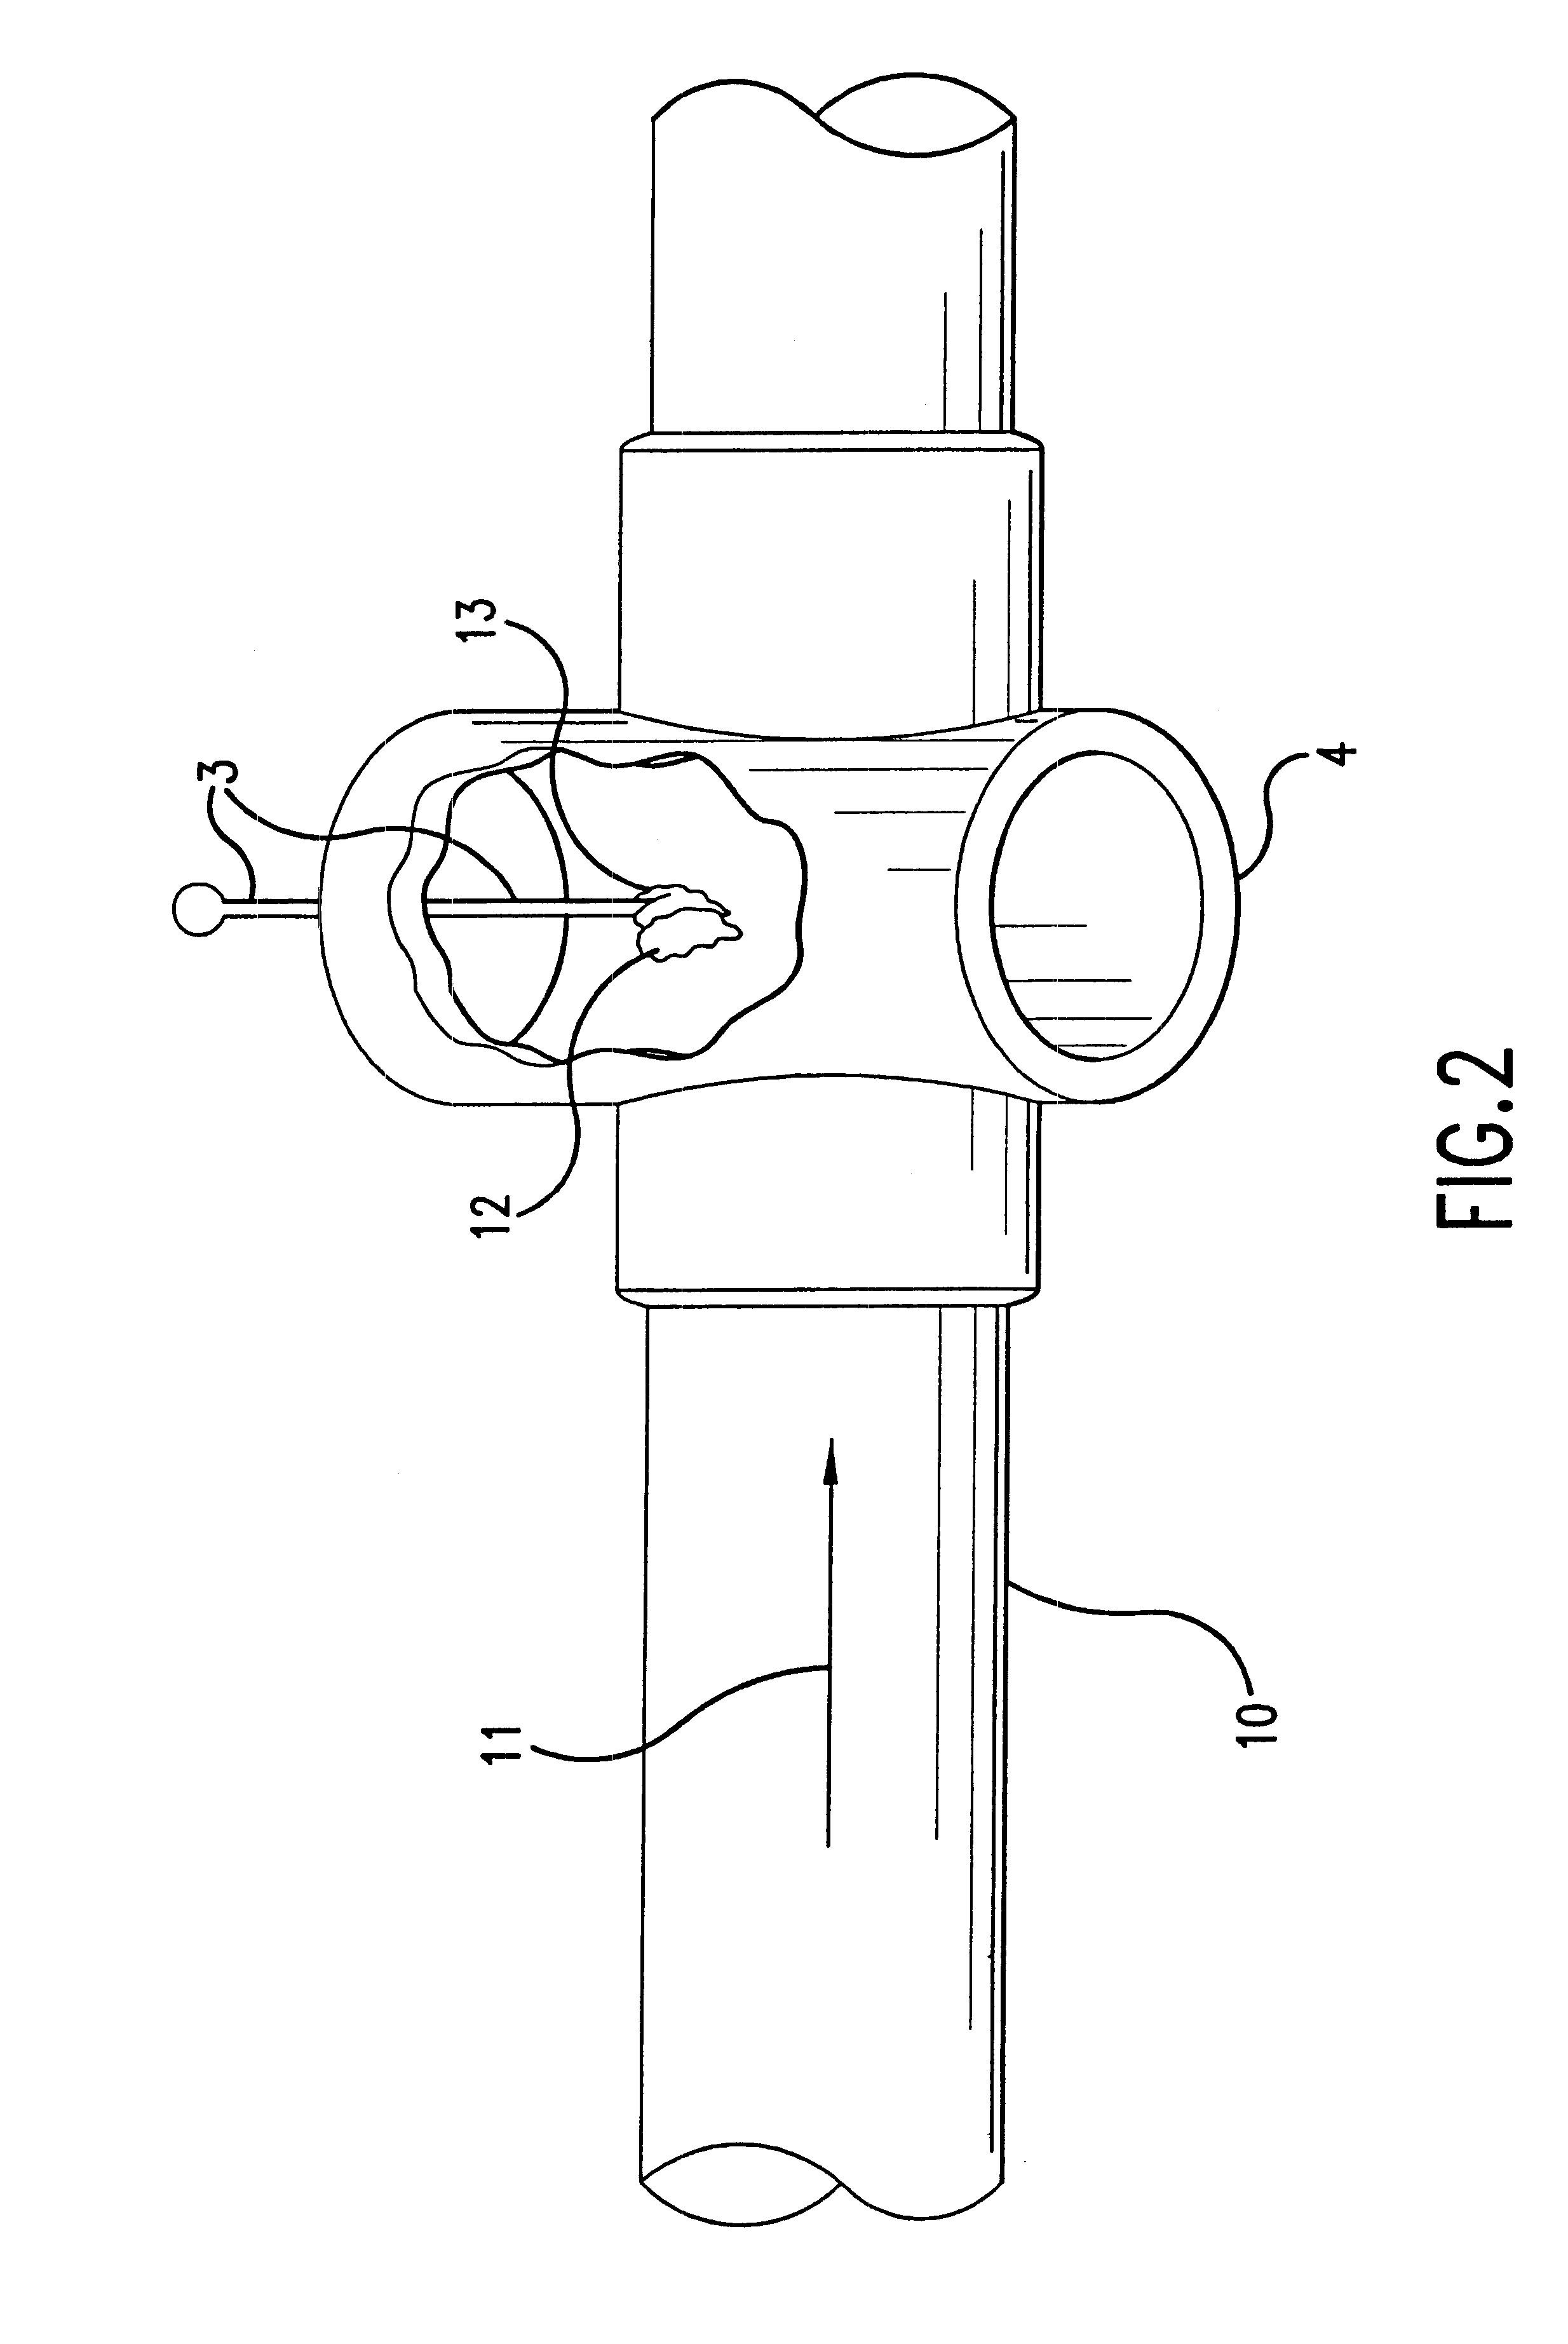 Apparatus and method for generating moisture standards in gases